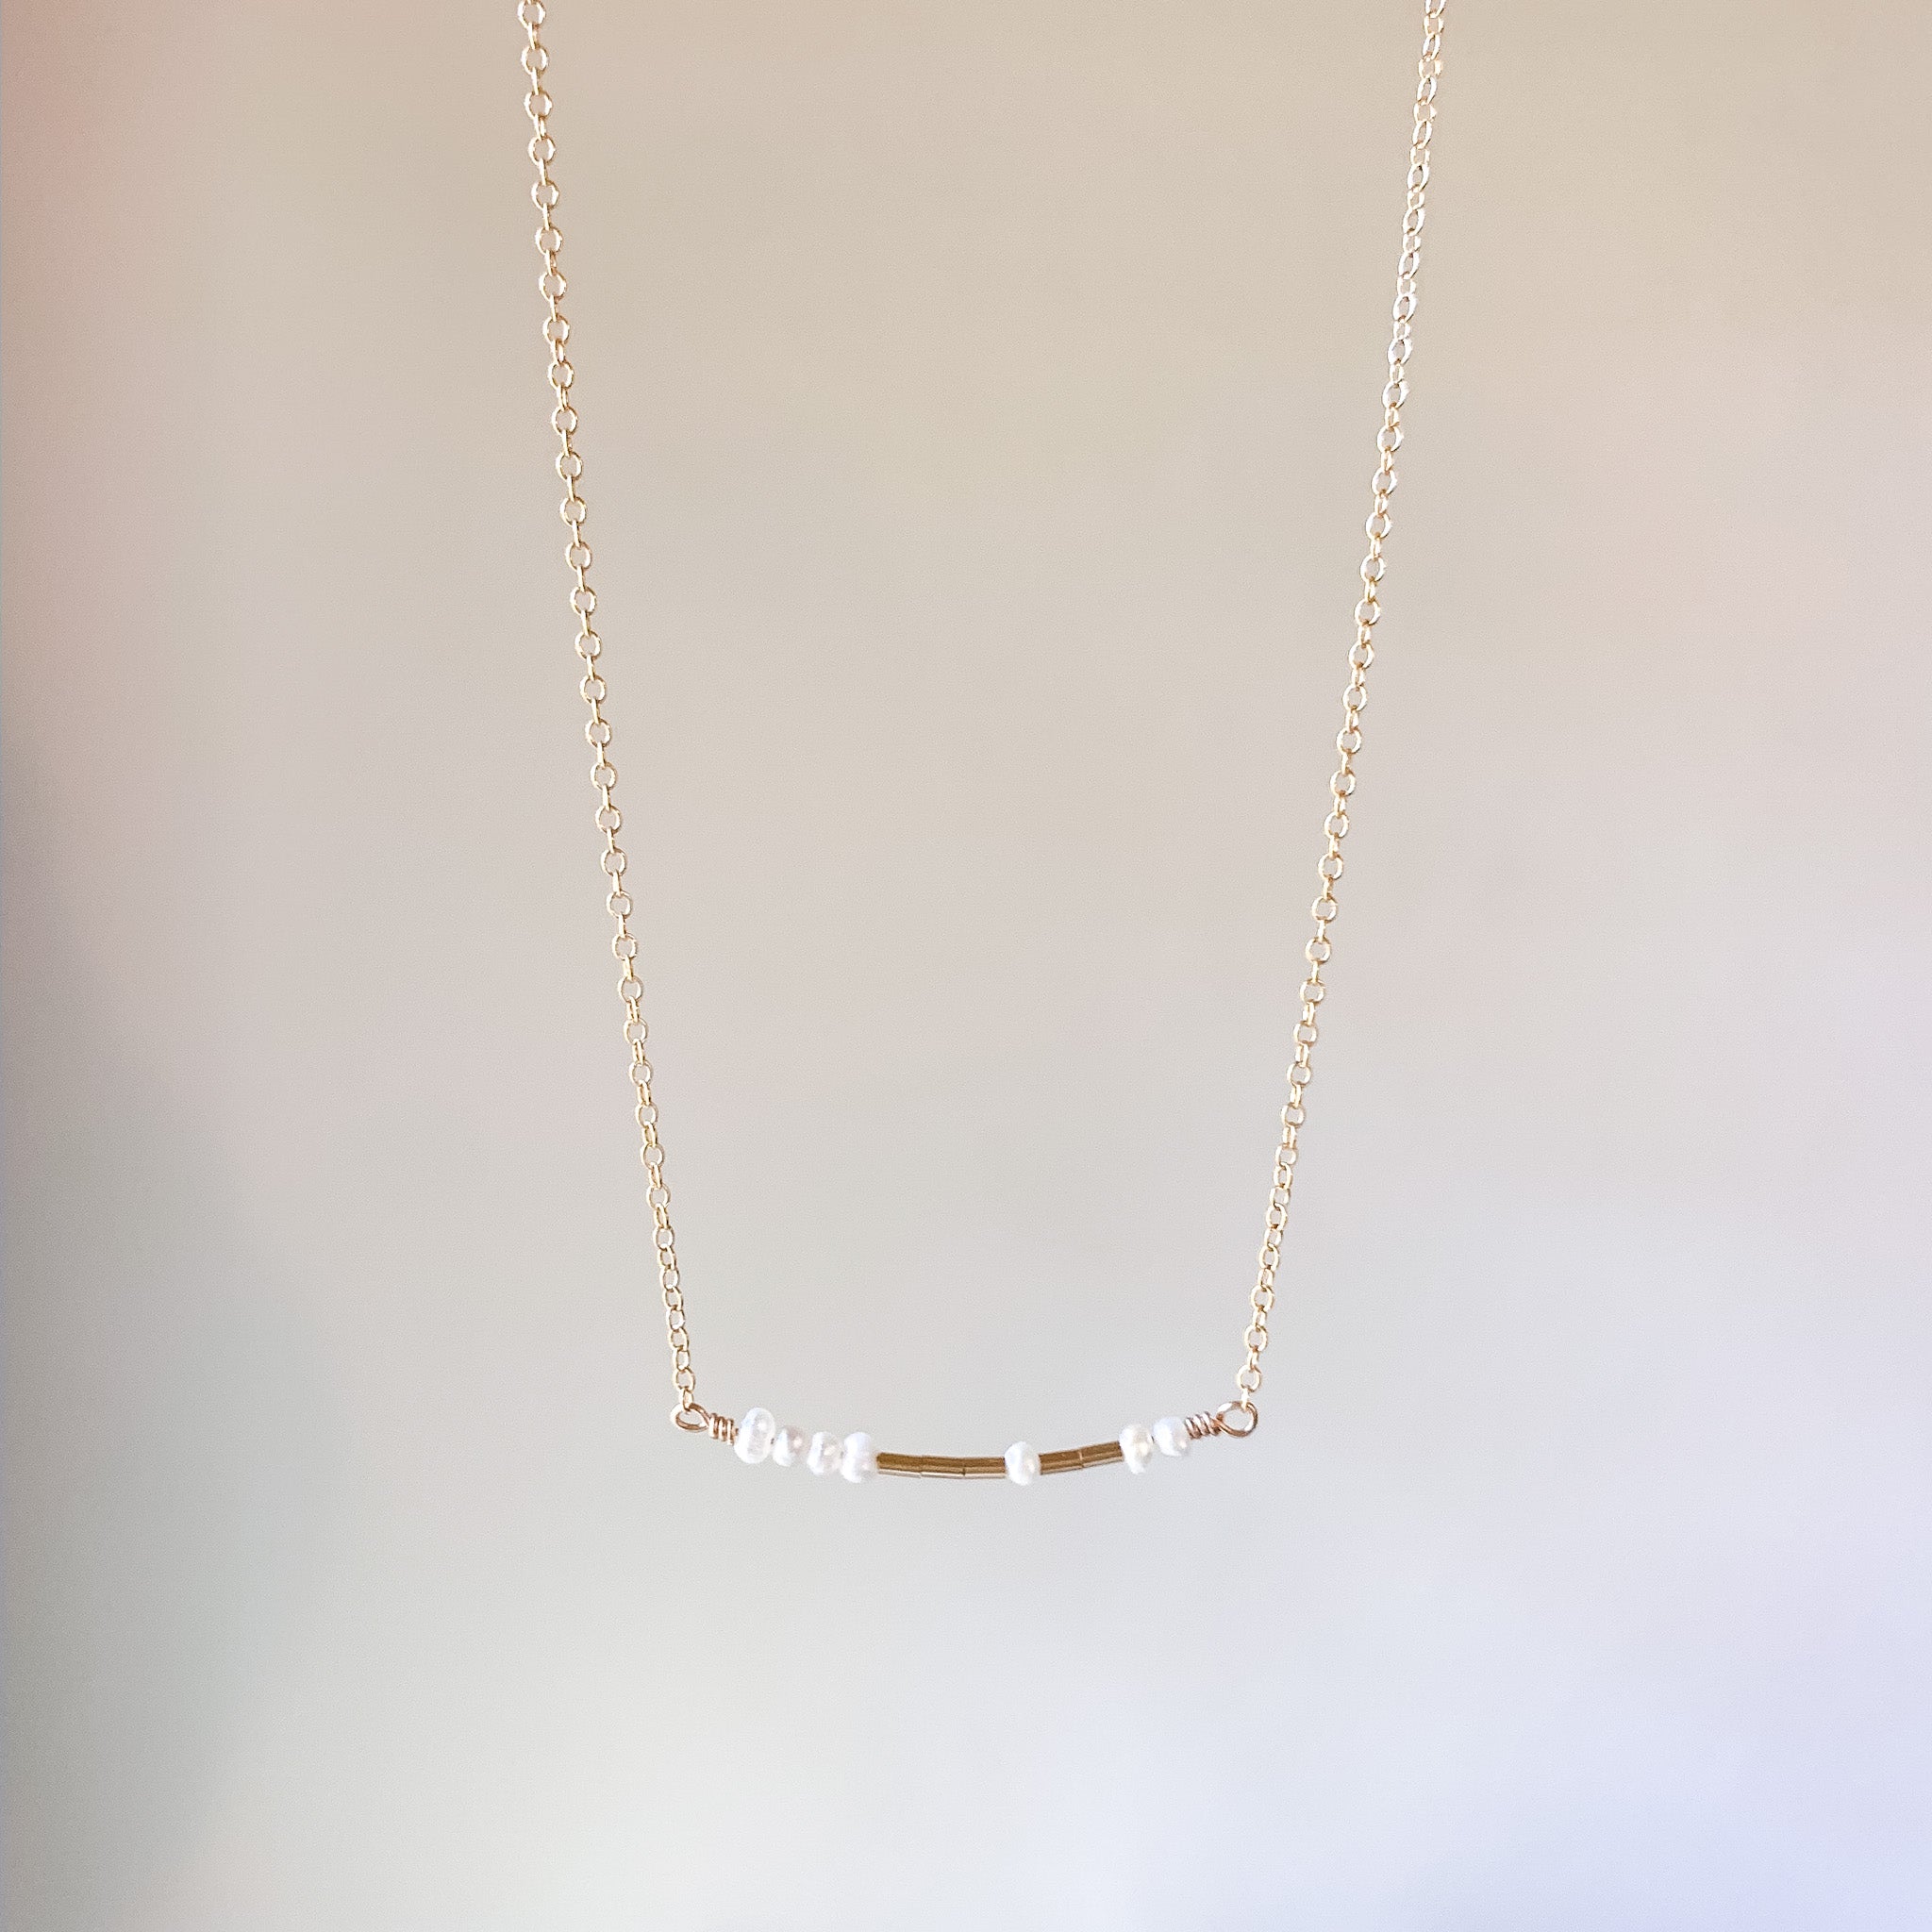 PEACE Morse Code Necklace - citrine blue glass handmade sterling silver  artisan srajd cserpentDesigns | AE Systems cserpentDesigns